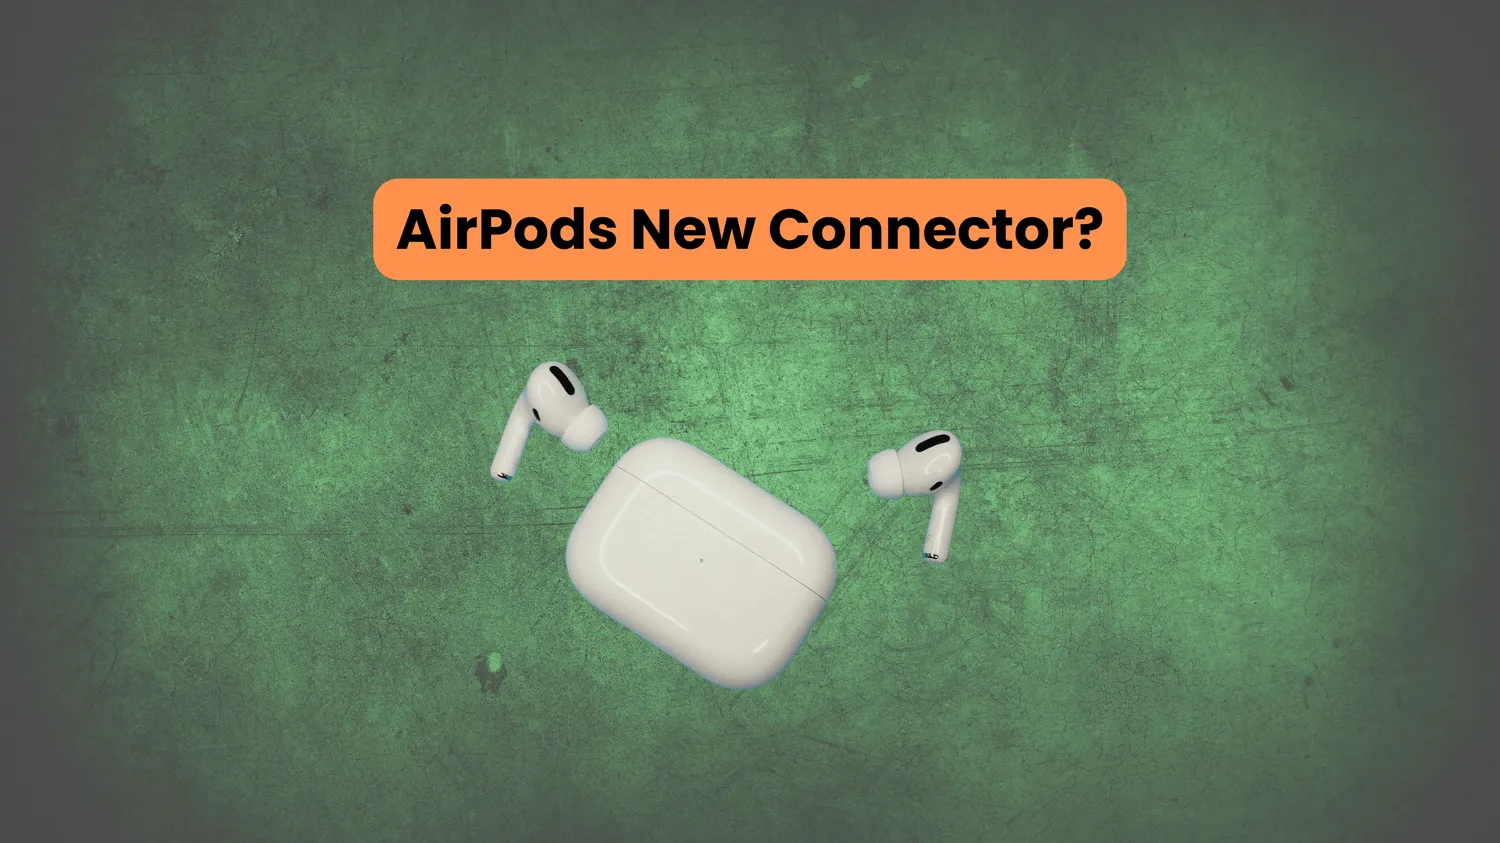 Apple AirPods pro on the green background